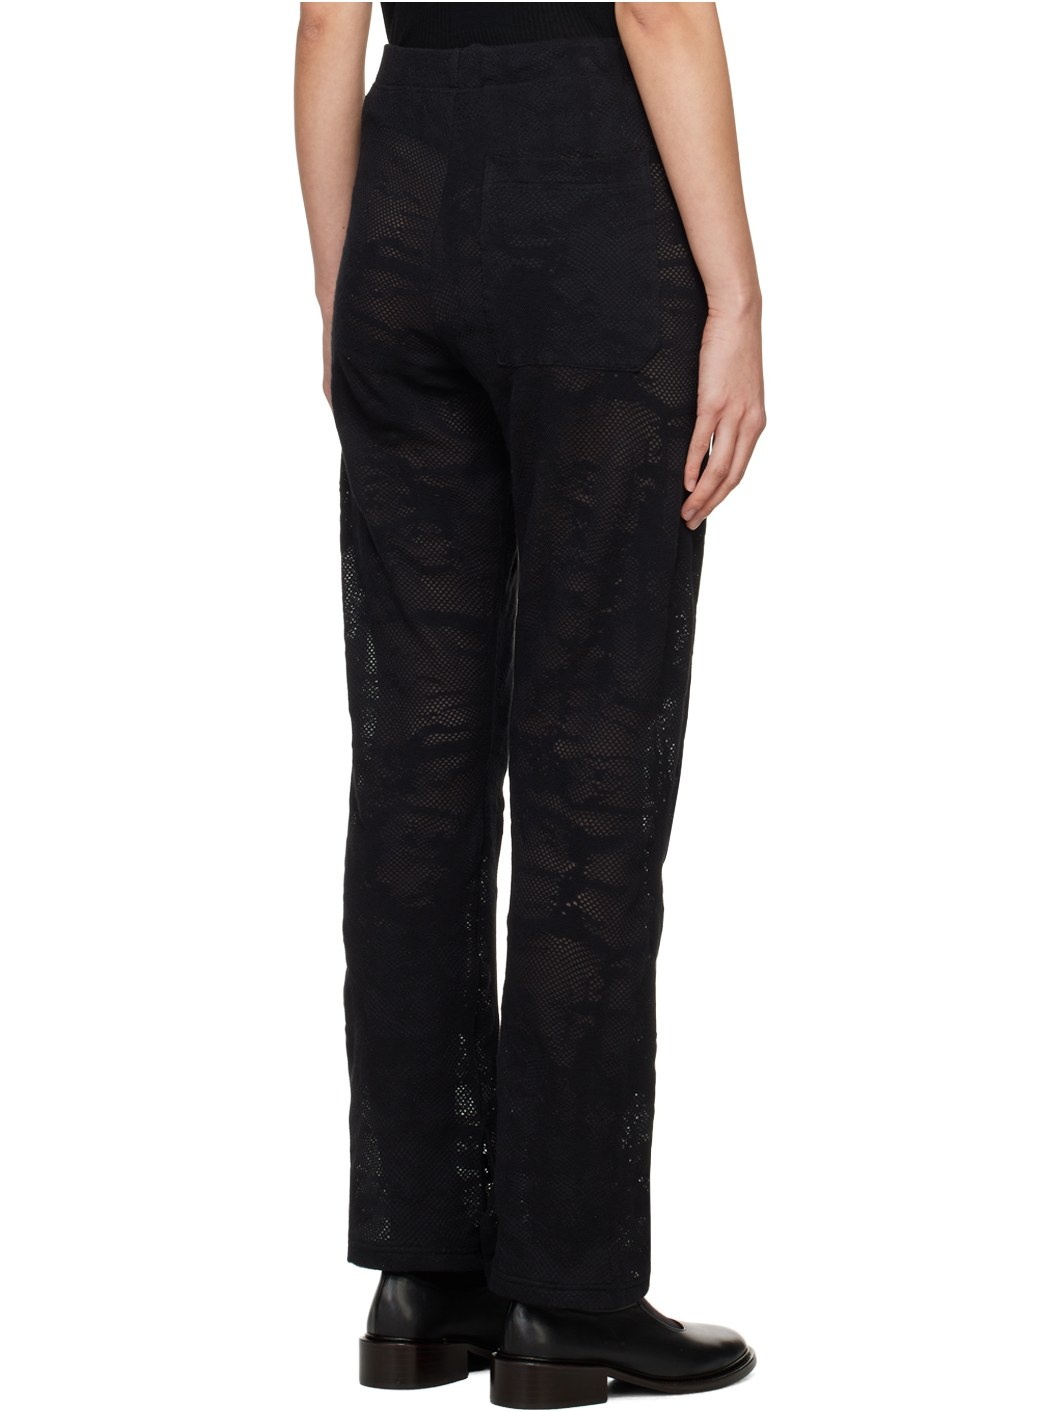 Black Graphic Trousers - 3